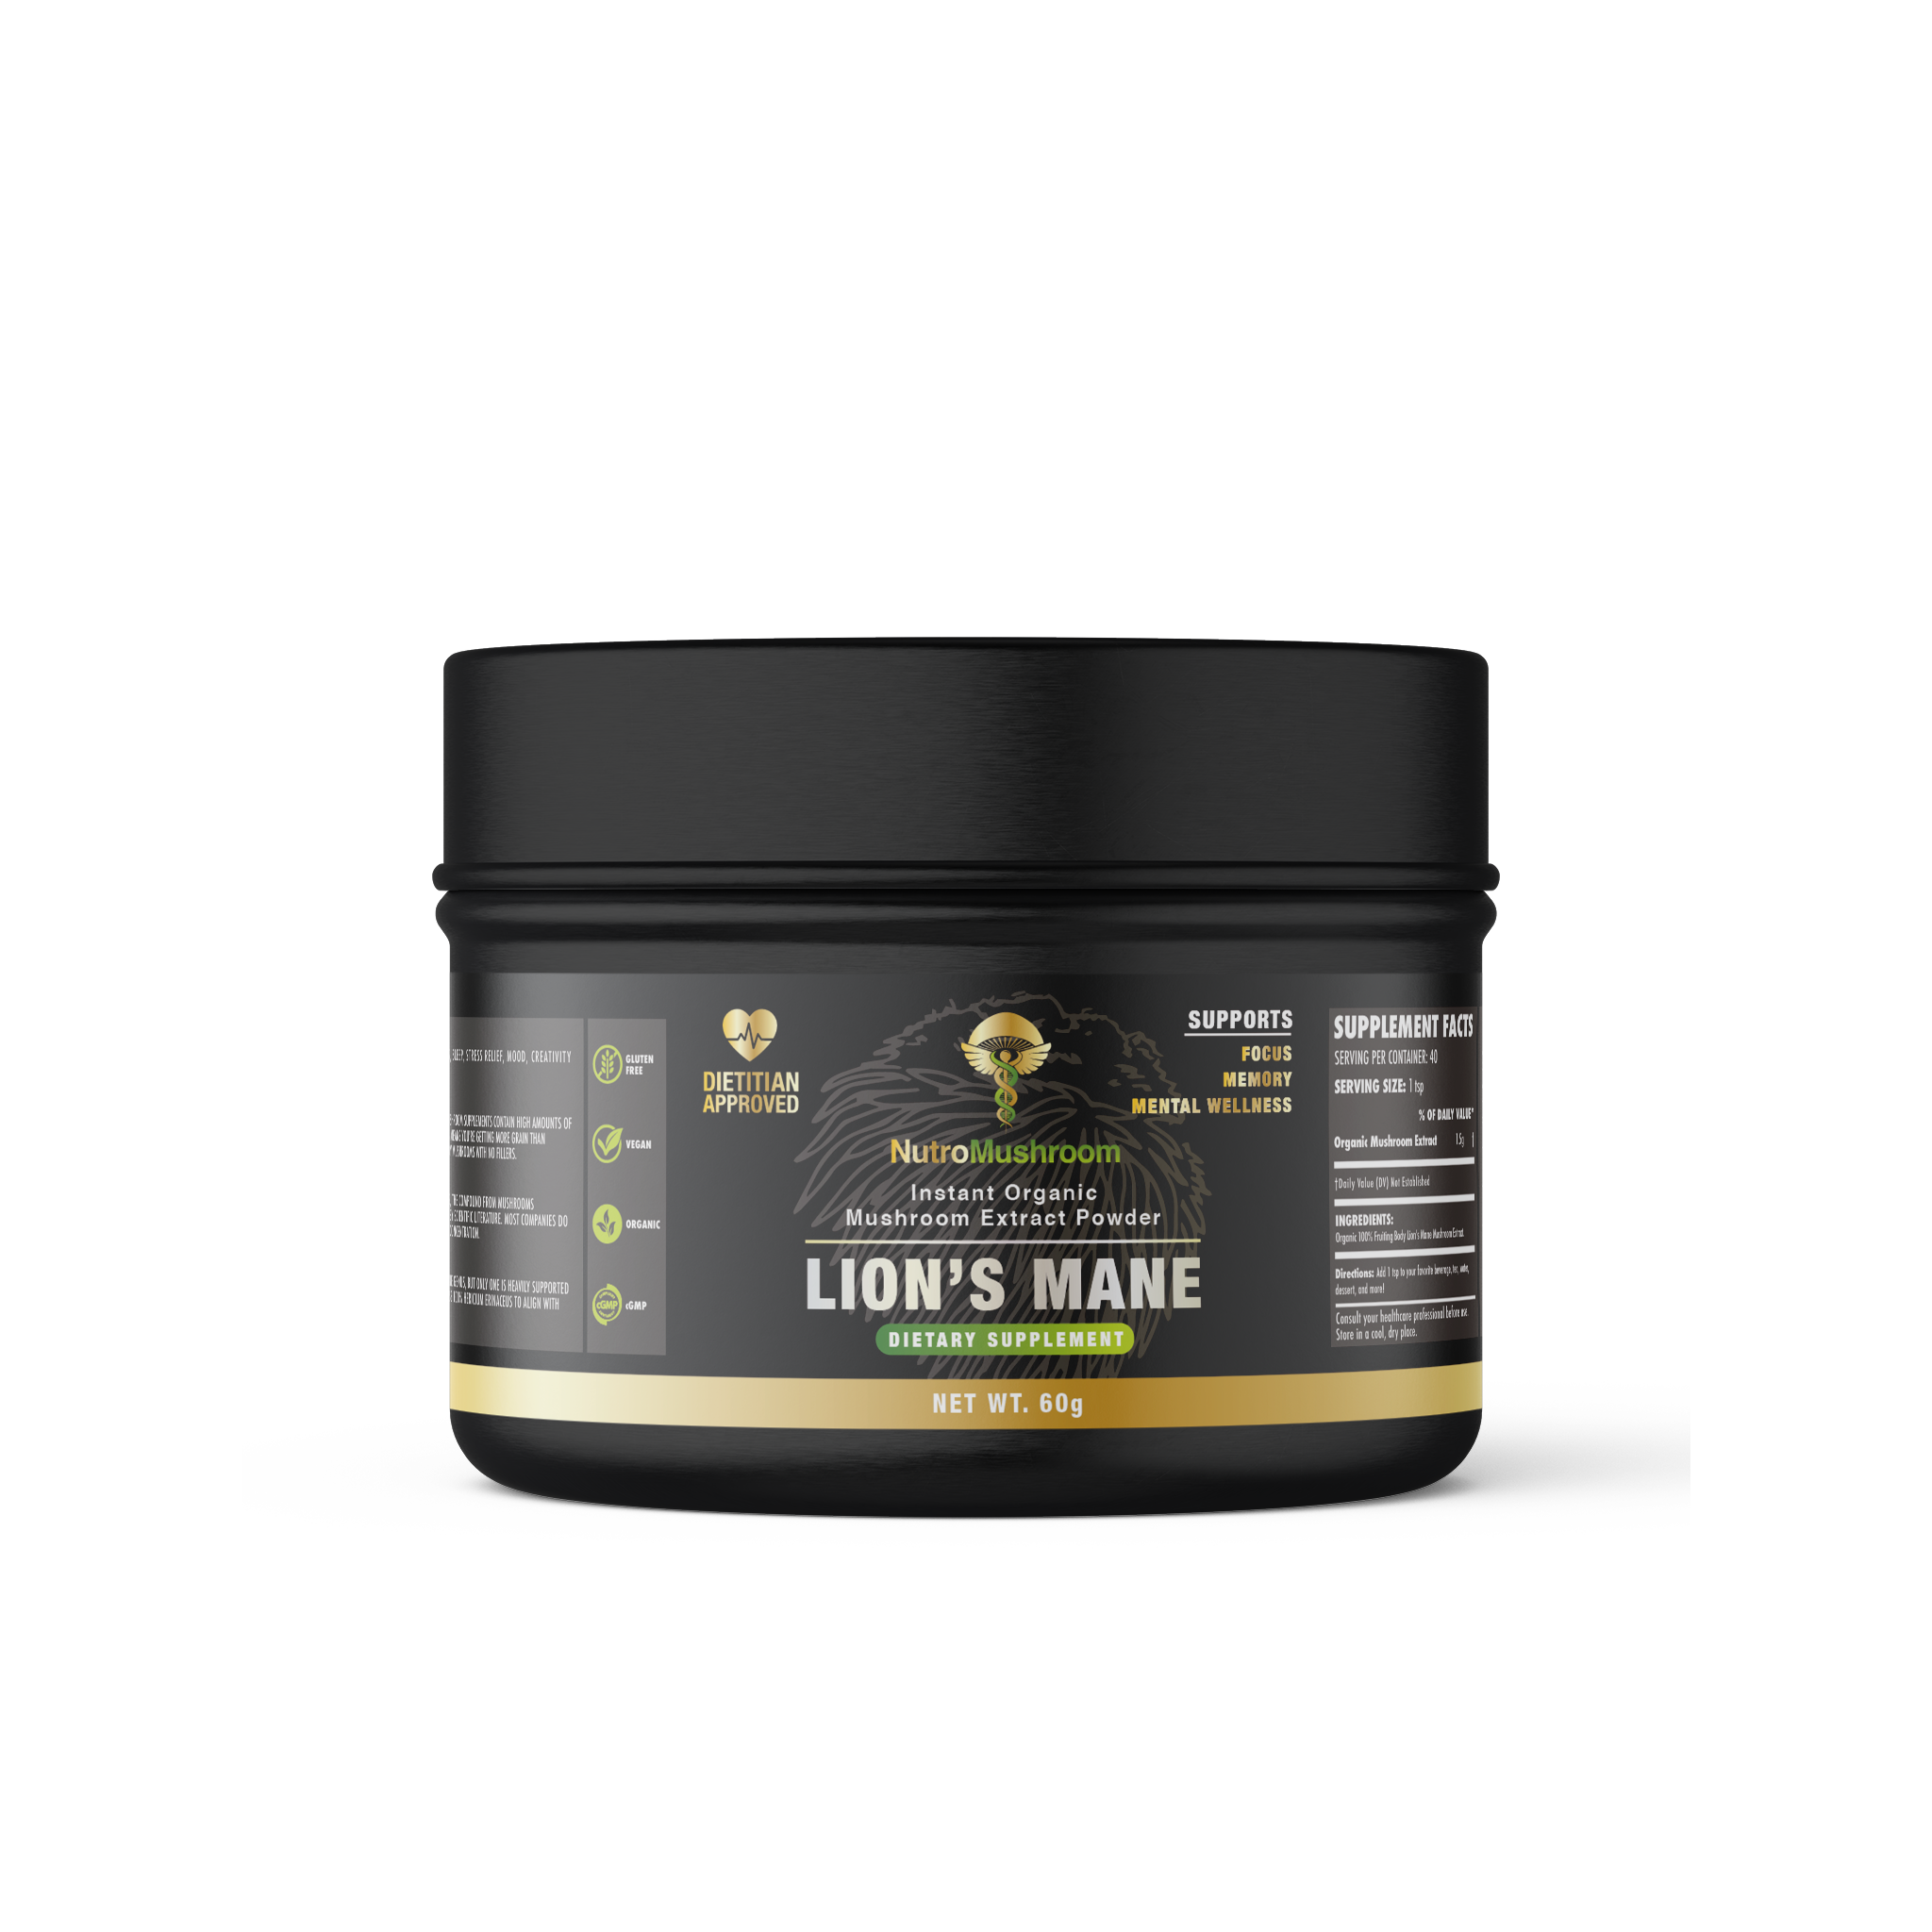  Lion's Mane extract powder supplement. The label is wrapped around a zero plastic tin with a Dietitian-approved stamp, organic icon and lion's mane mushrooms in the background. 